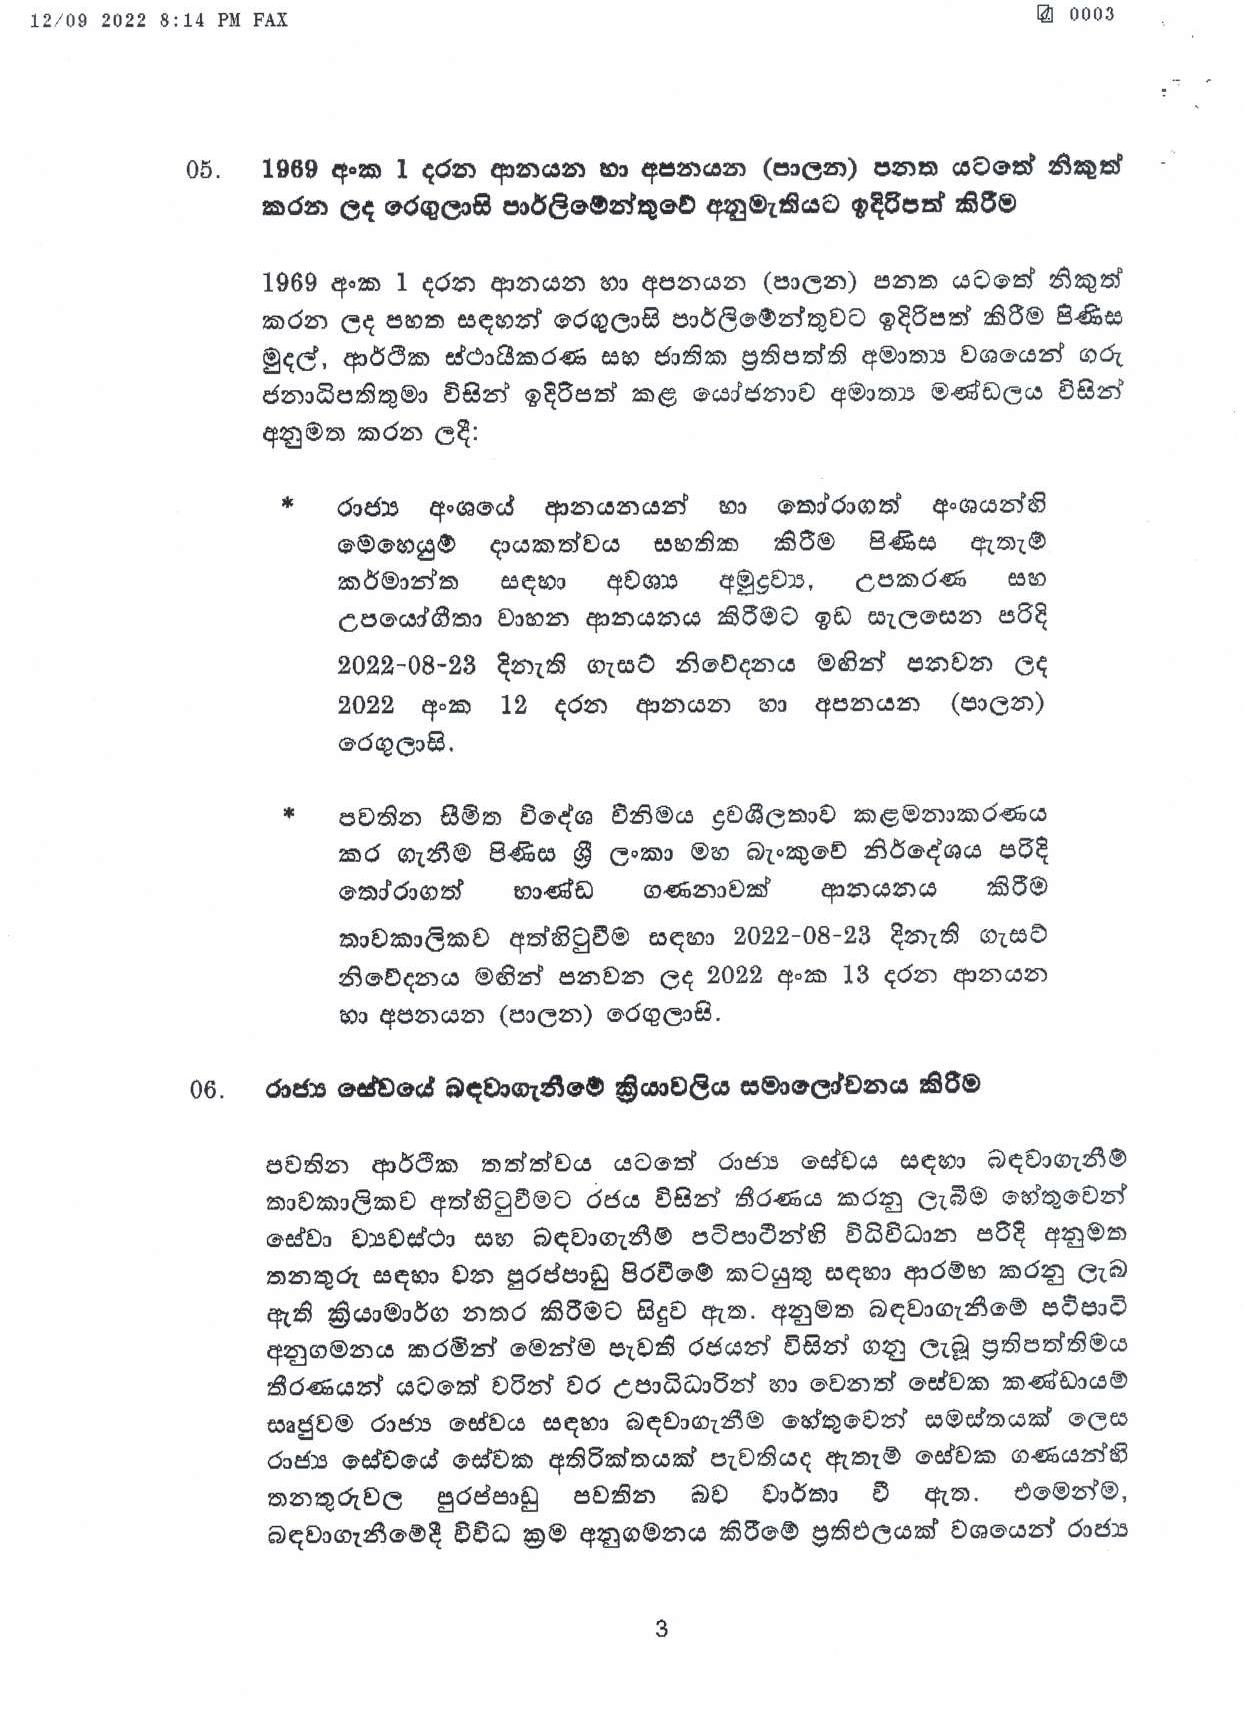 Cabinet Decisions on 12.09.2022 page 003